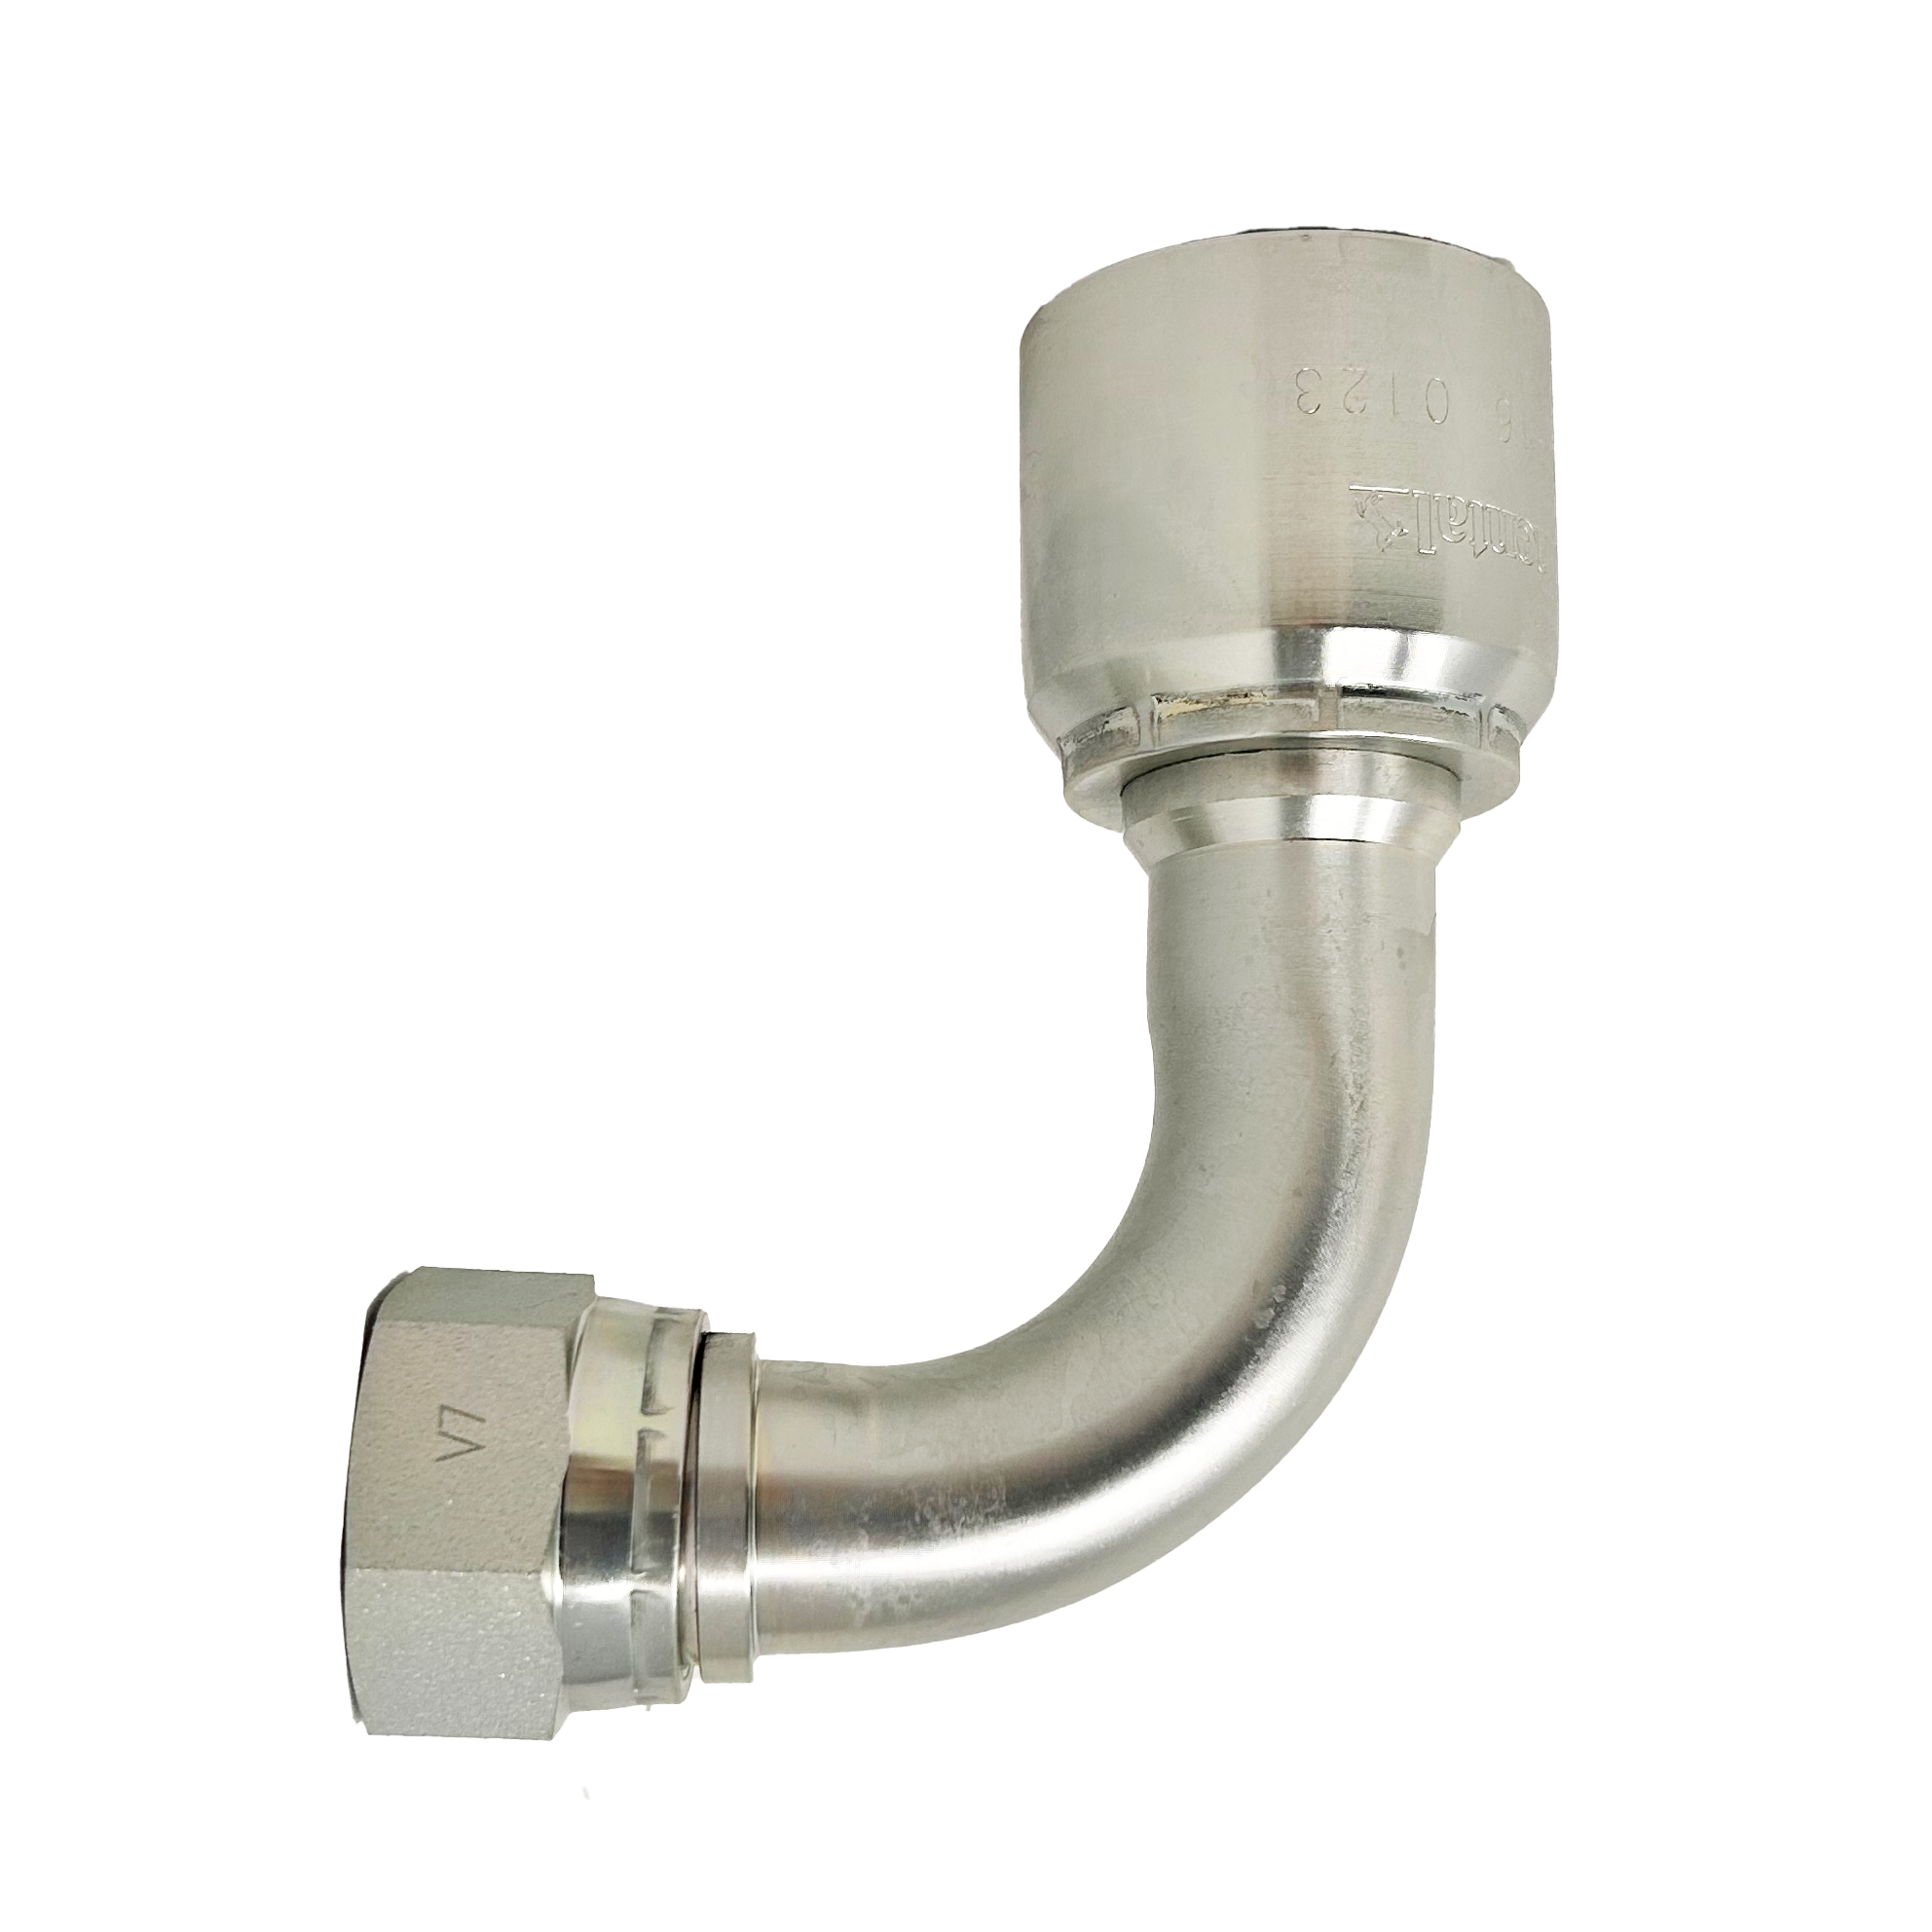 B2-JCFX90-0406S: Continental Hose Fitting, 0.25 (1/4") Hose ID x 9/16-18 Female JIC, 90-Degree Swivel Connection